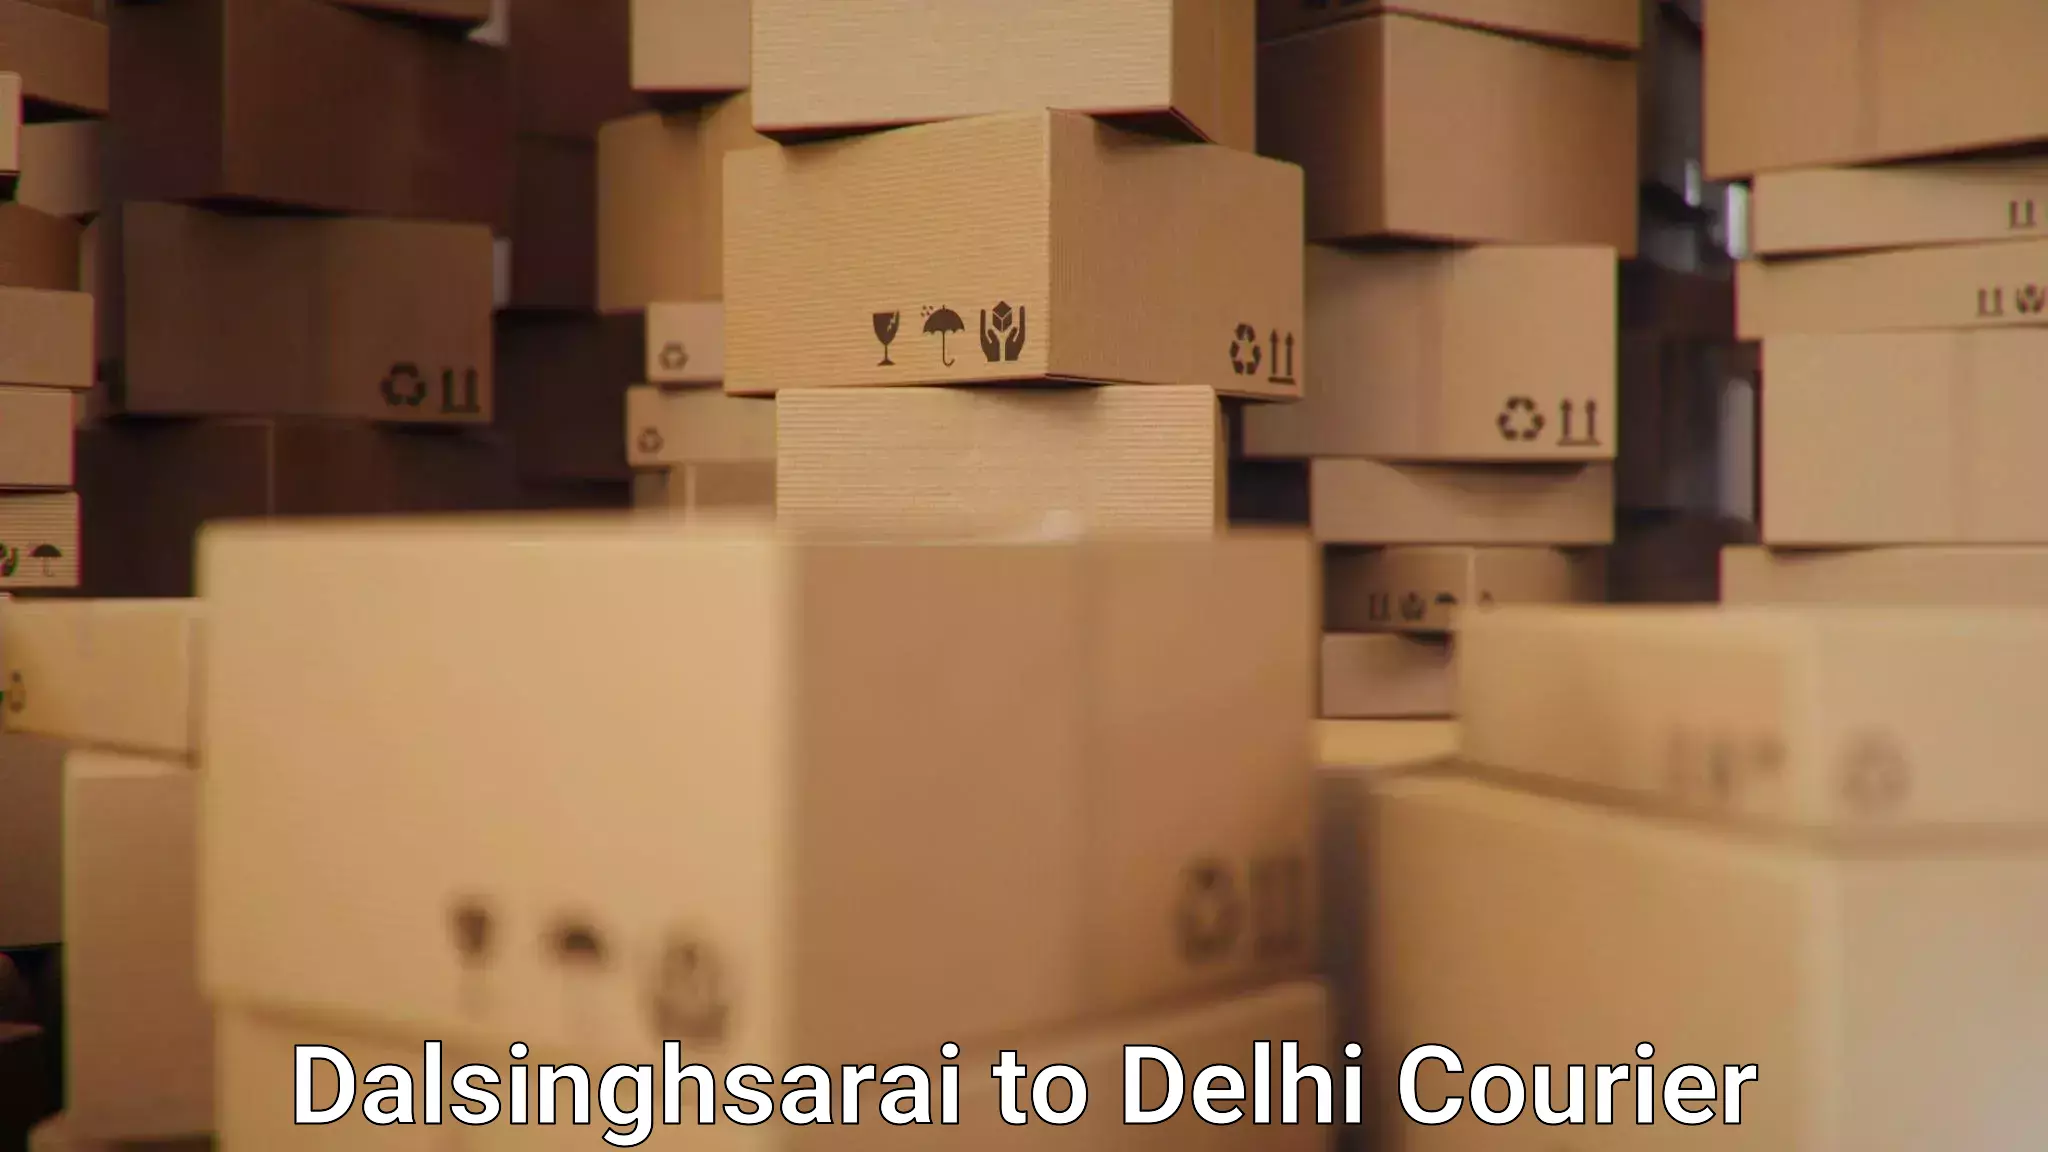 Nationwide shipping coverage Dalsinghsarai to NCR